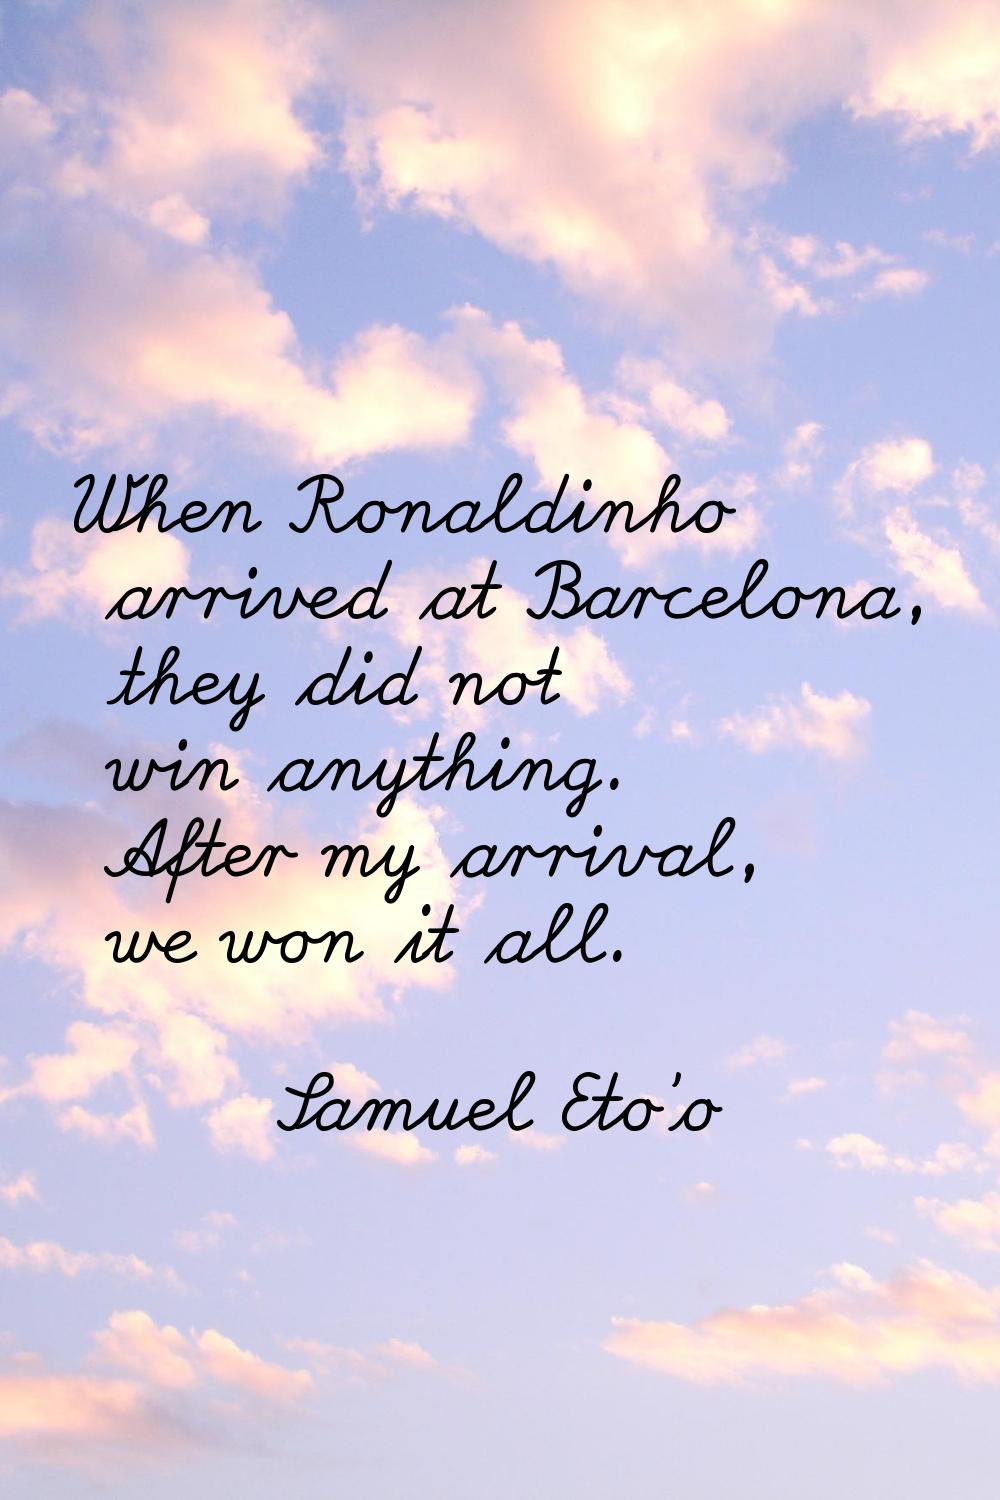 When Ronaldinho arrived at Barcelona, they did not win anything. After my arrival, we won it all.